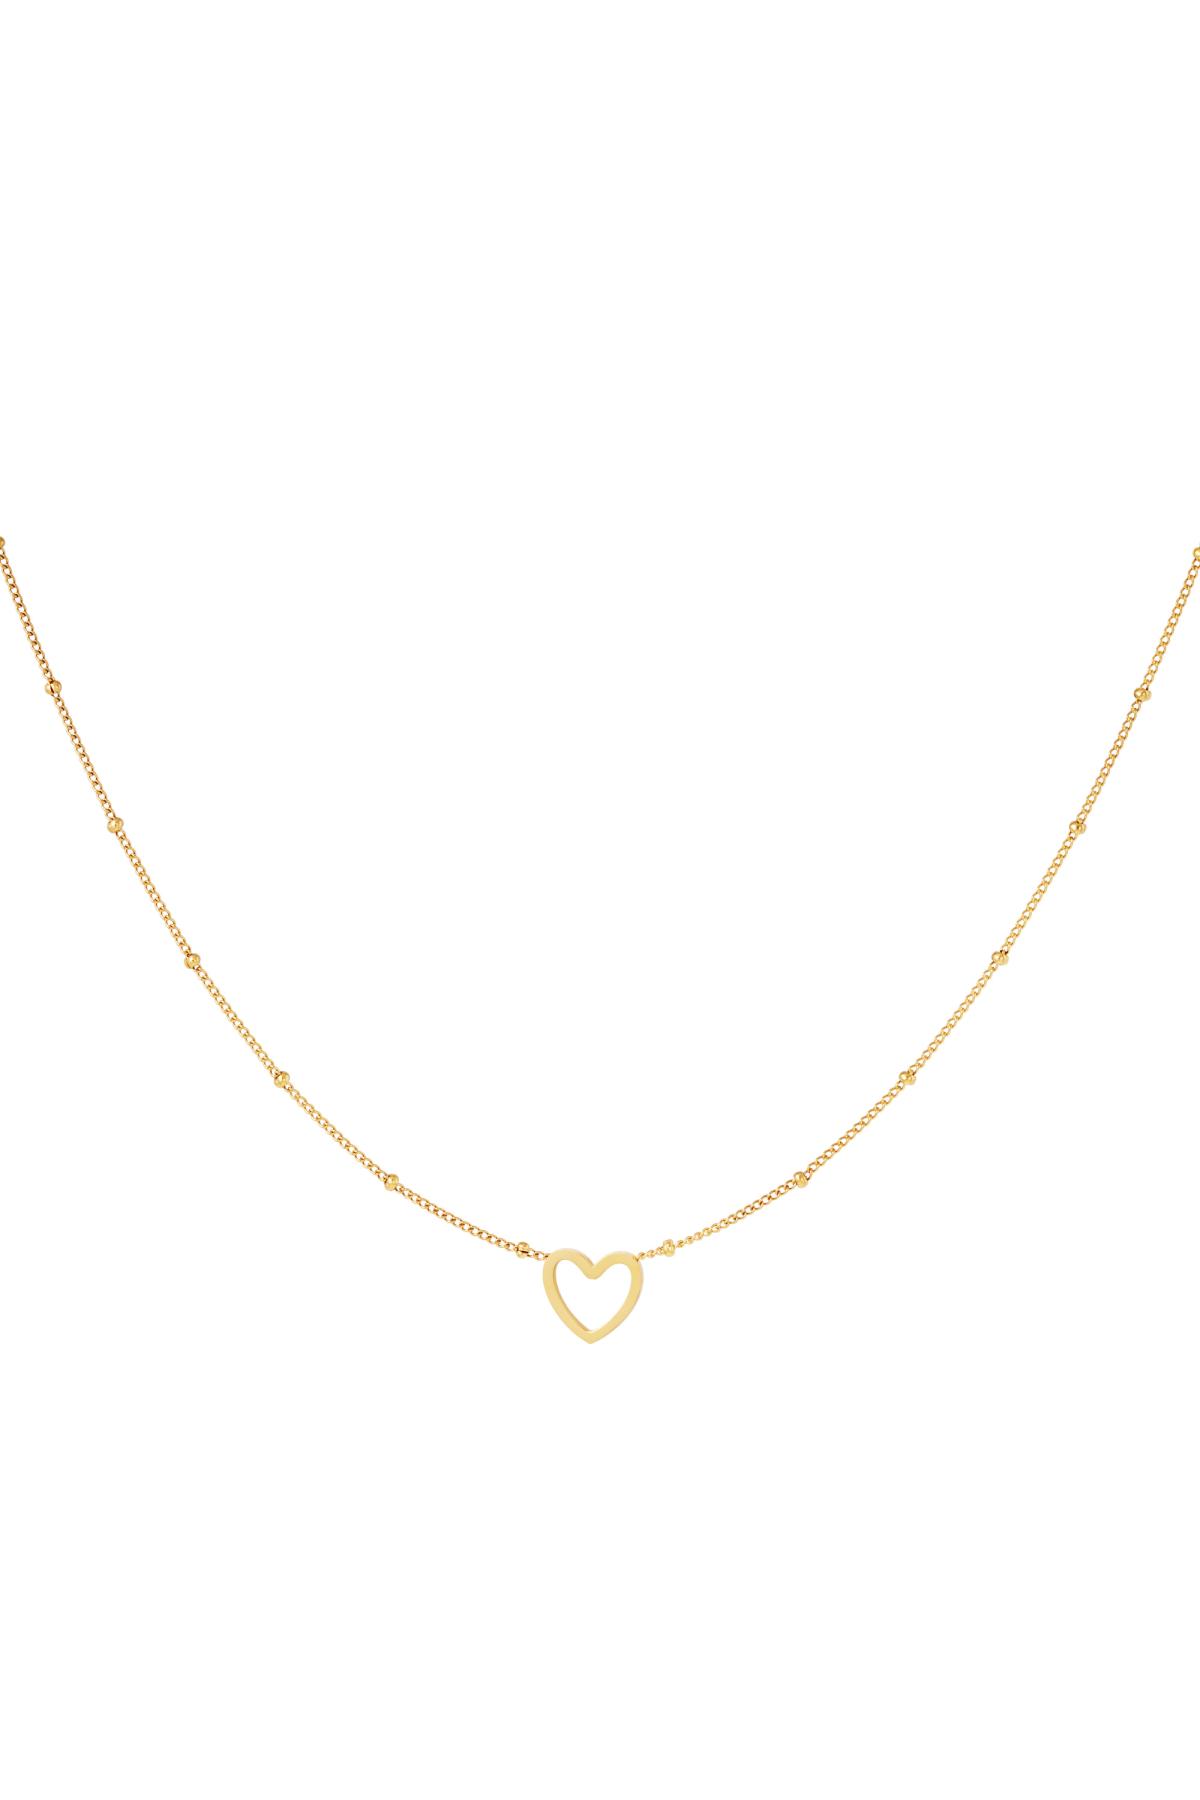 Minimalistic necklace open heart Gold Stainless Steel